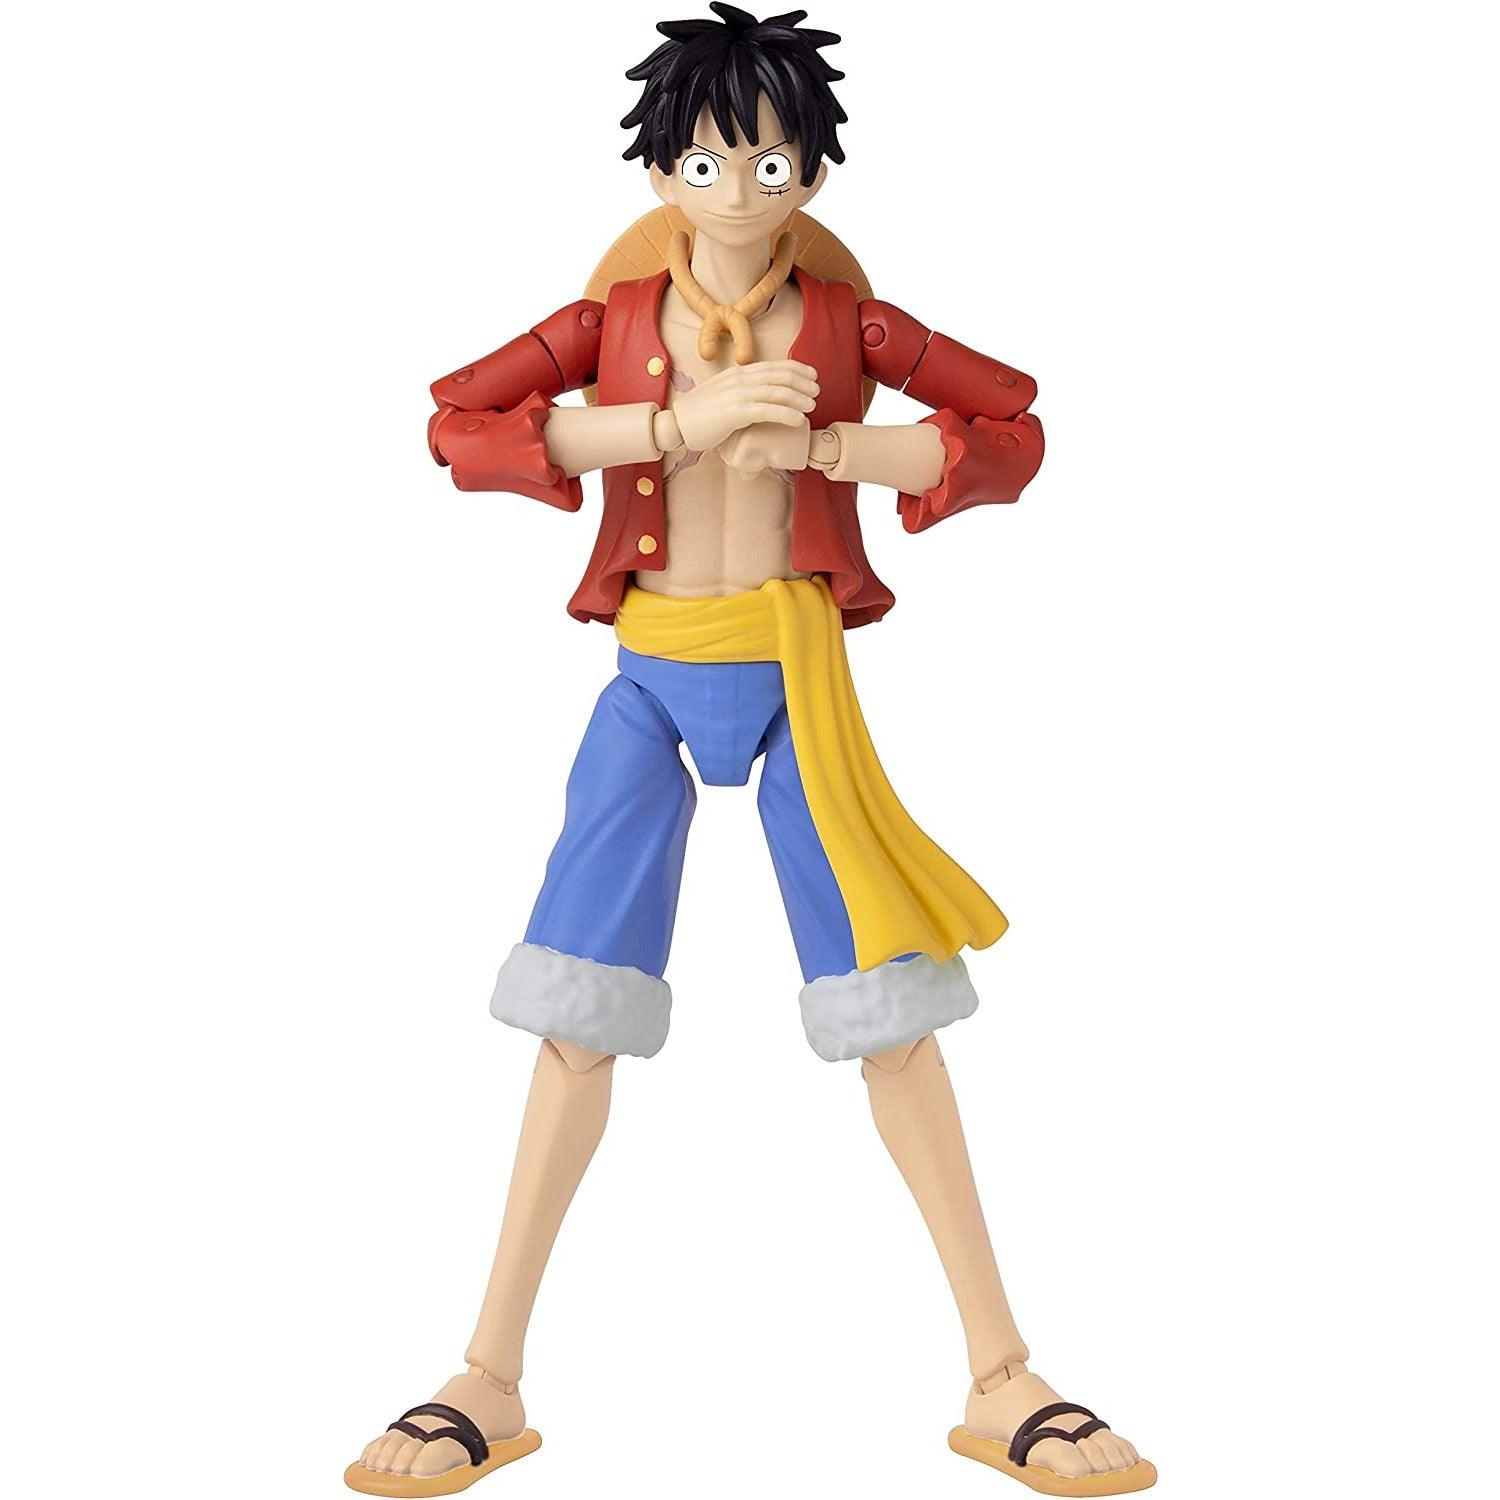 ANIME HEROES Bandai America One Piece, Monkey D. Luffy - BumbleToys - 6+ Years, 6-8 years, Action Figures, Bandai America, Boys, Characters, Figures, OXE, Pre-Order